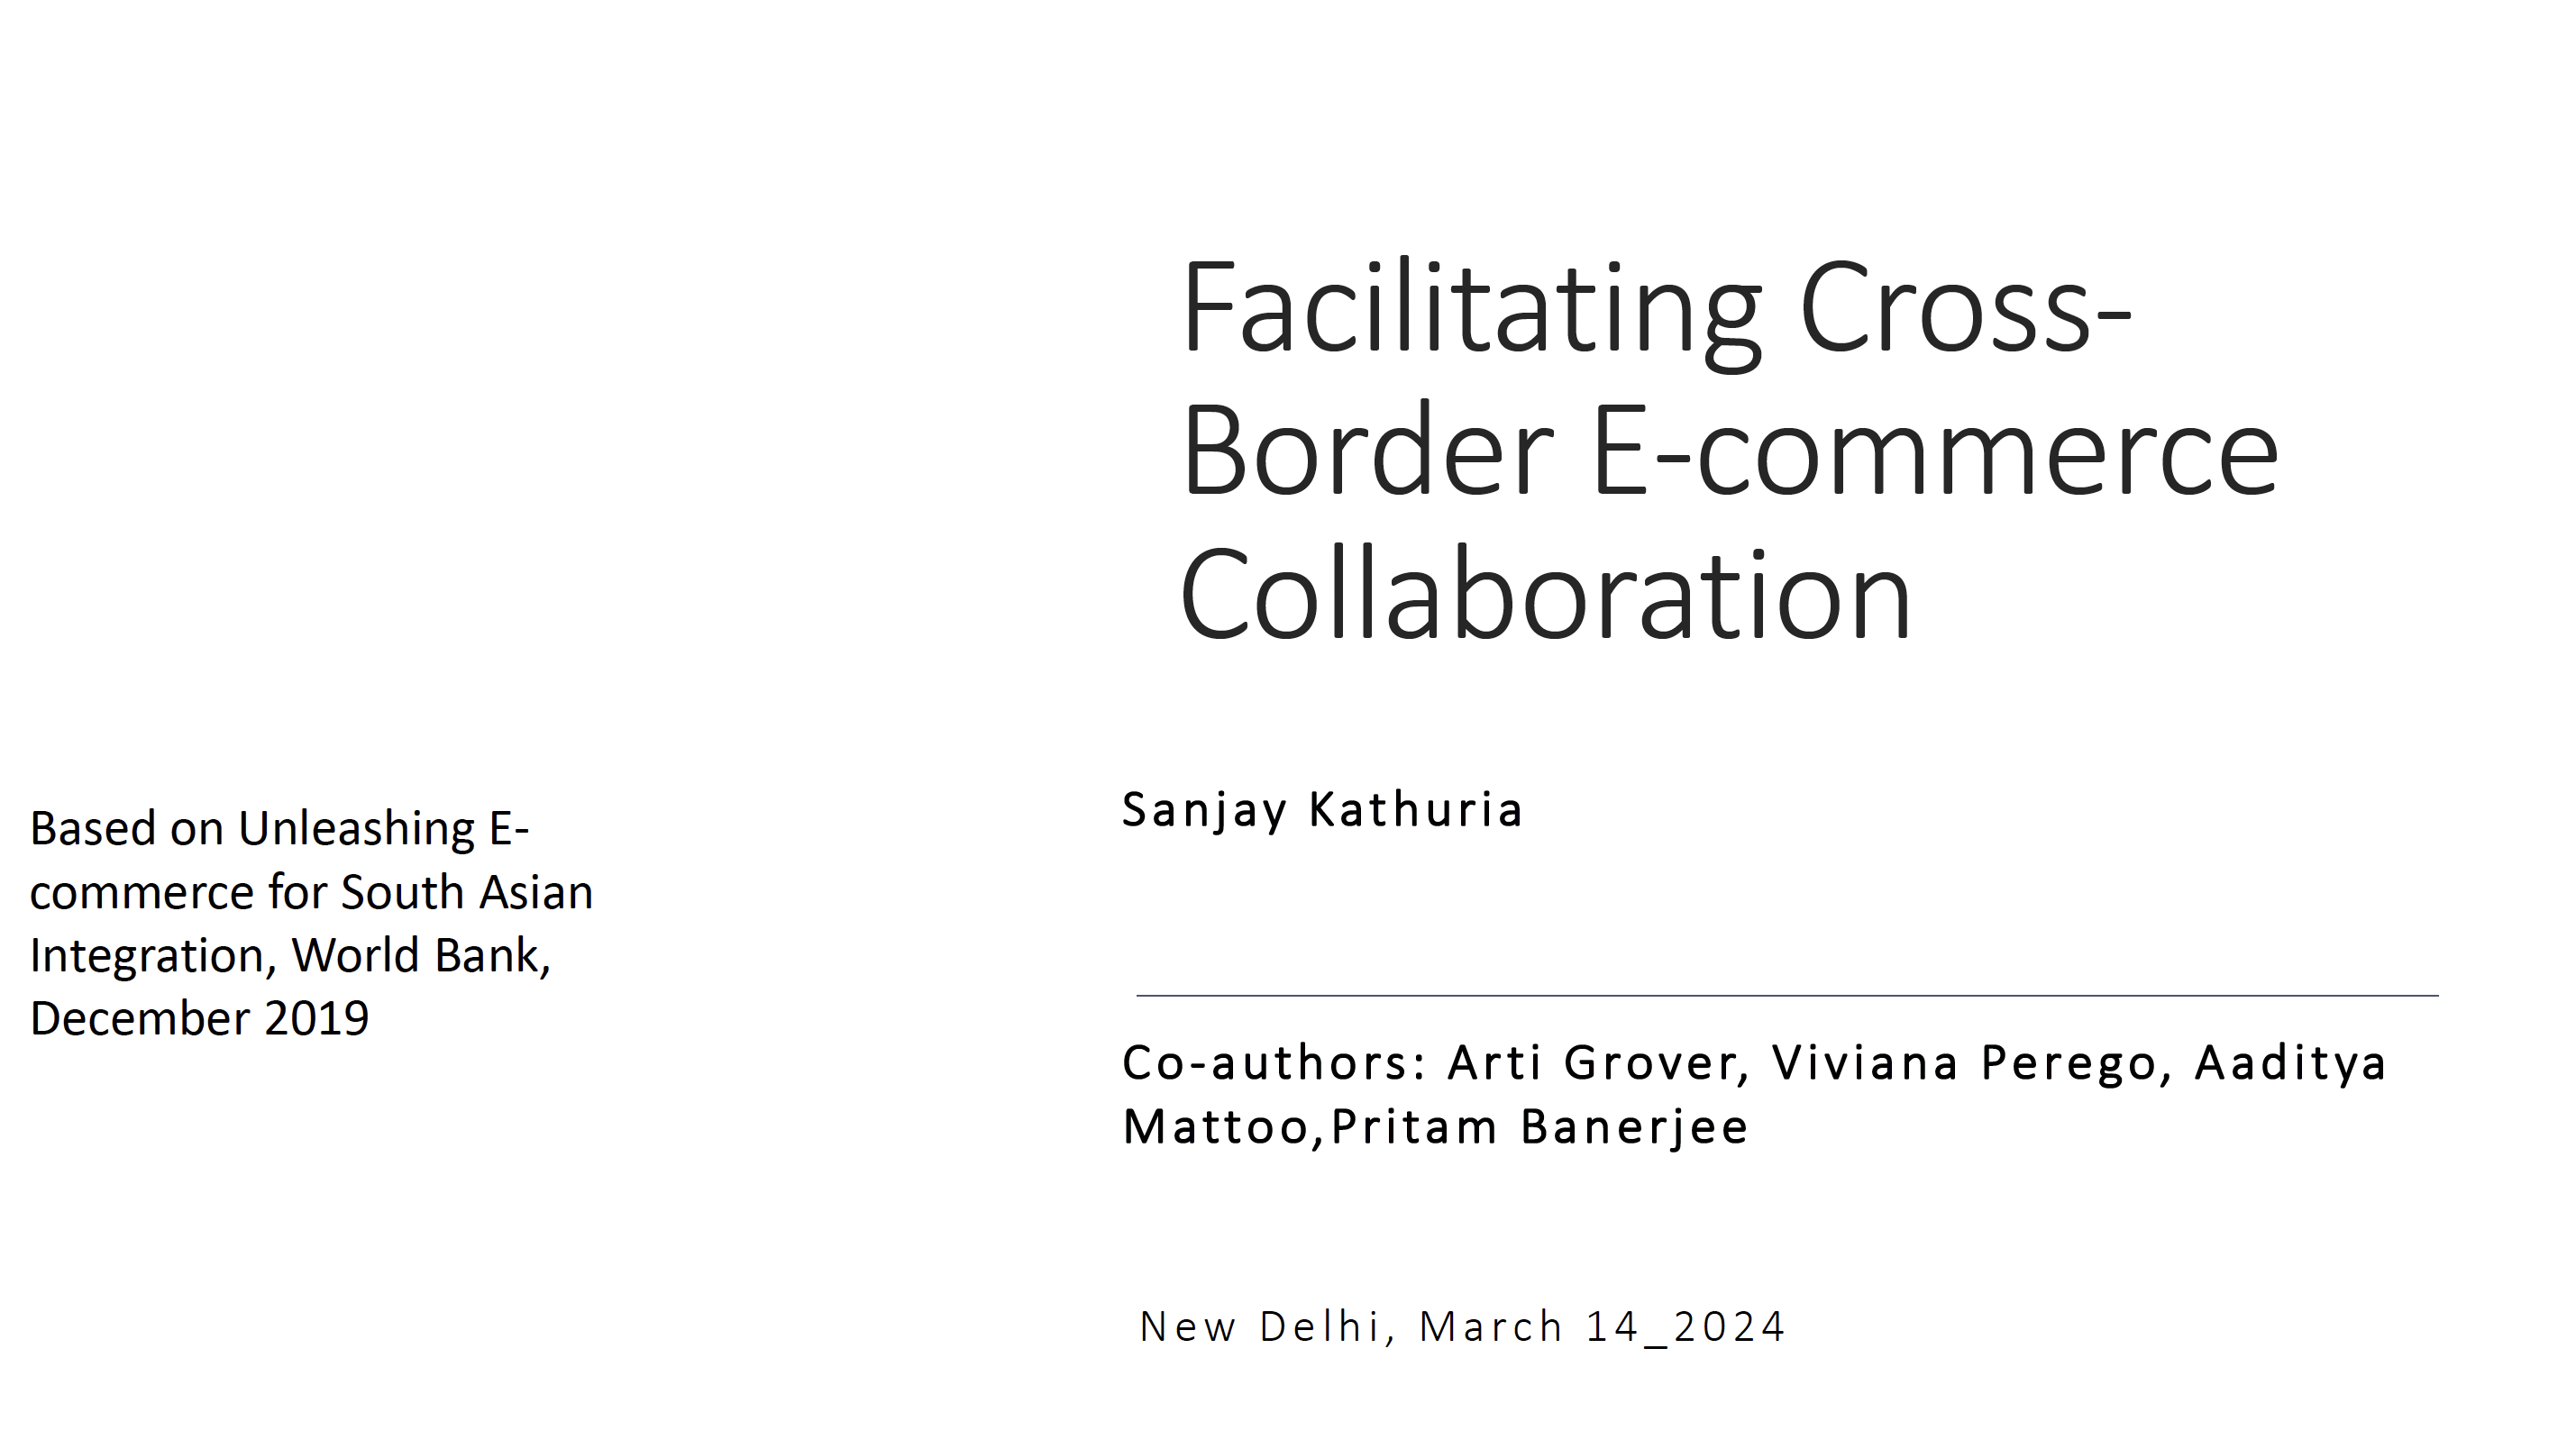 Dr. Sanjay Kathuria, Visiting Senior Fellow, Centre for Social and Economic Progress; Visiting Expert, US Institute of Peace on ‘Facilitating Cross-Border E-Commerce Collaborations’